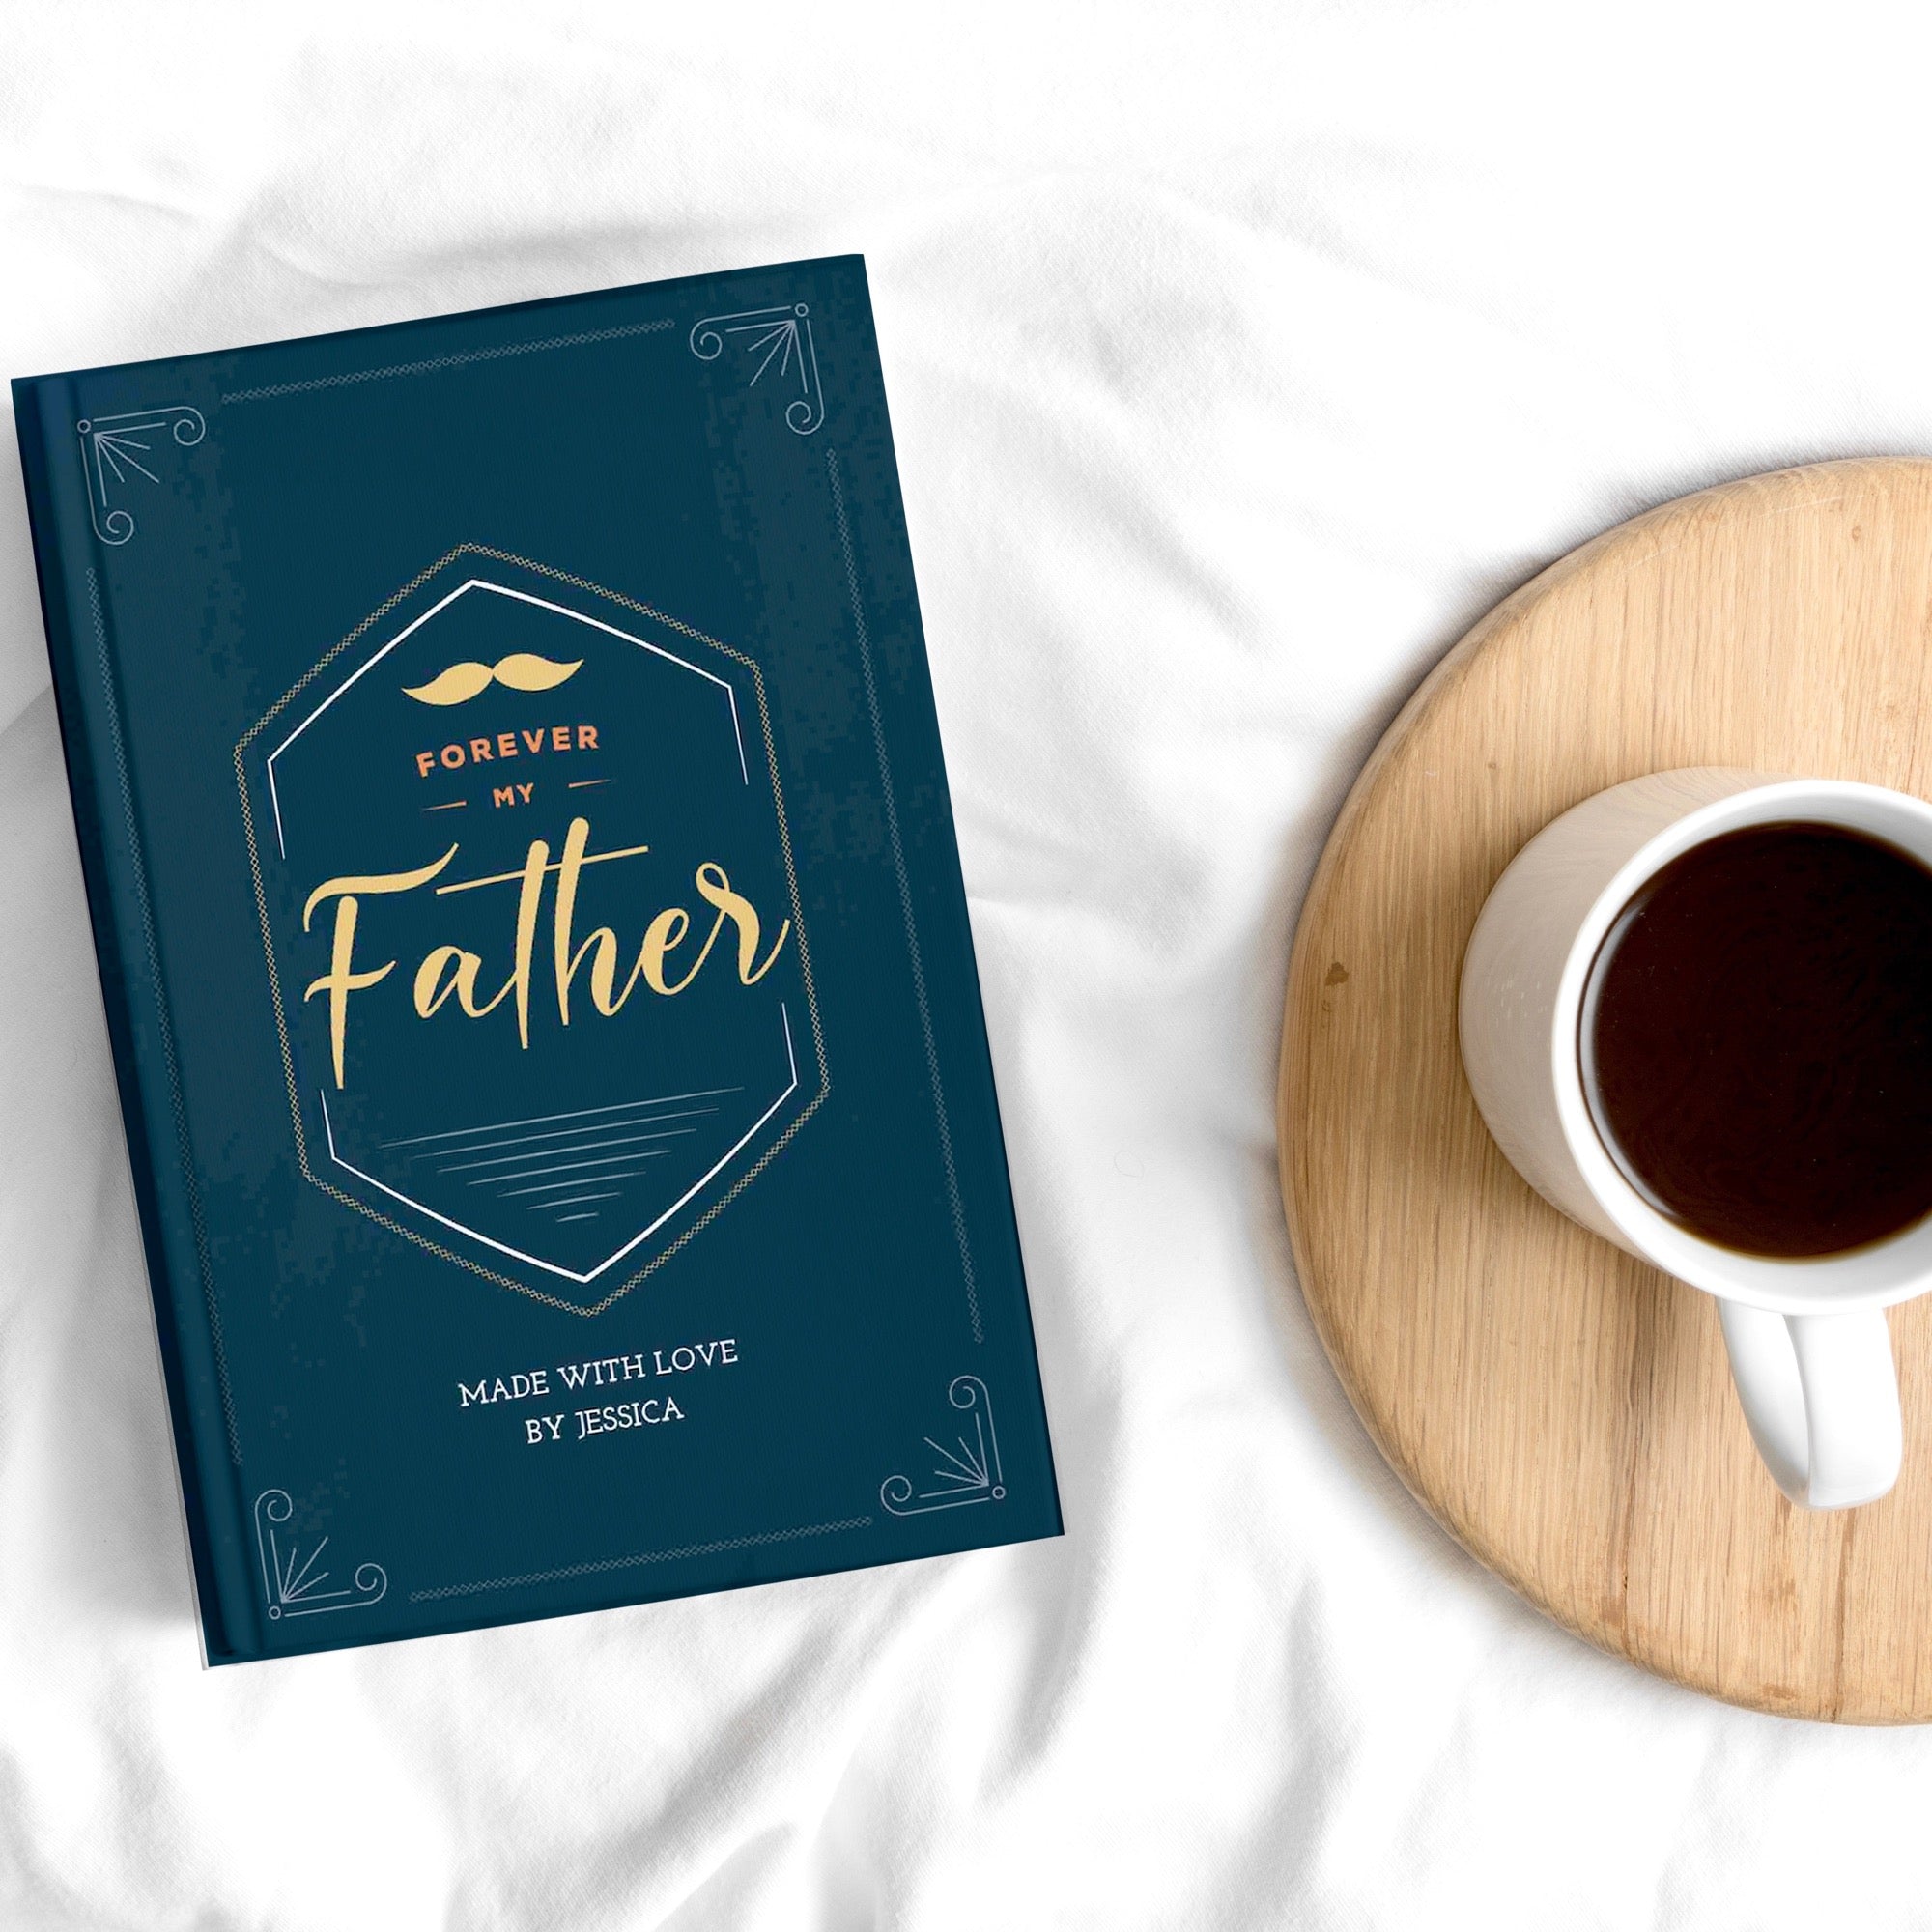 Father Daughter Gifts For Dad, Personalized Fathers Day Gift From Daughter,  To My Dad If I Could Give You One Thing In Life Canvas Print - Best  Personalized Gifts For Everyone